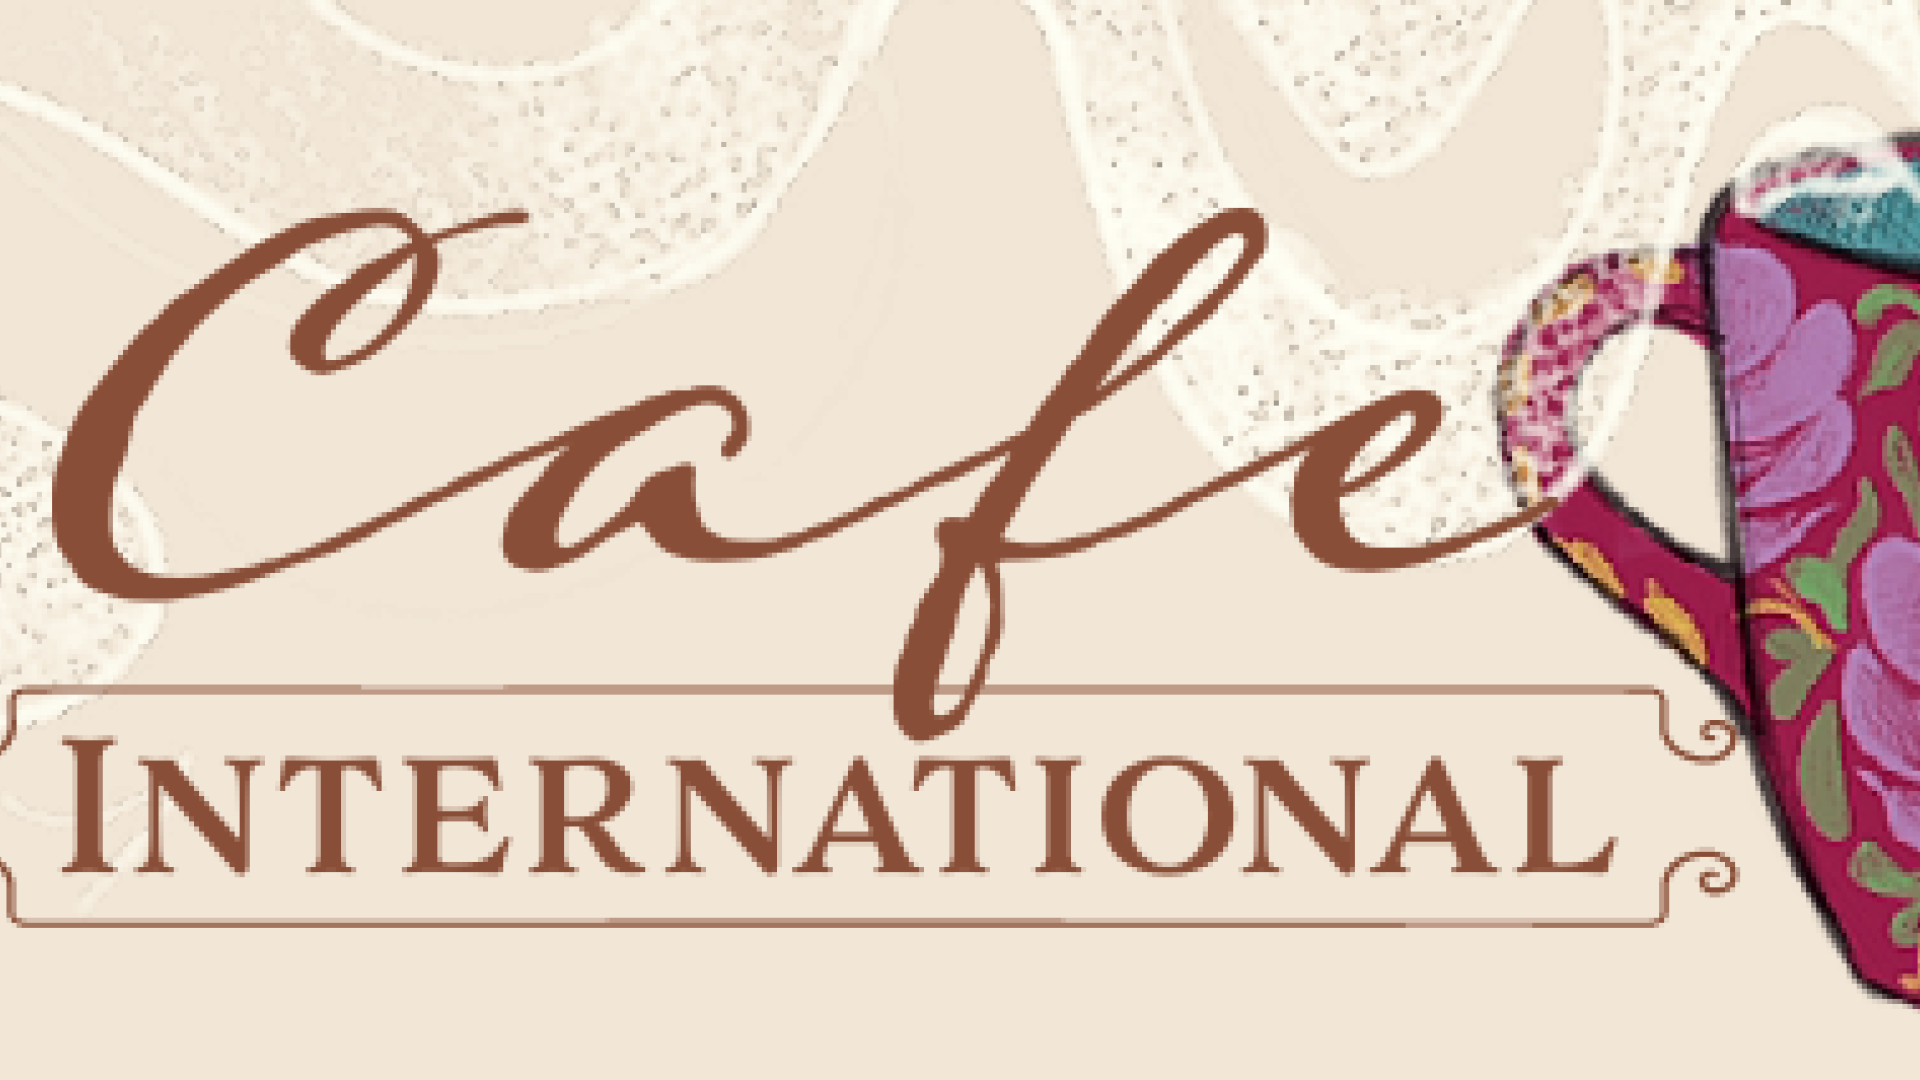 Beige background with &quot;Cafe&quot; in a cursive font above &quot;International&quot; next to a red coffee mug with flower designs on it where the steam flows across the banner